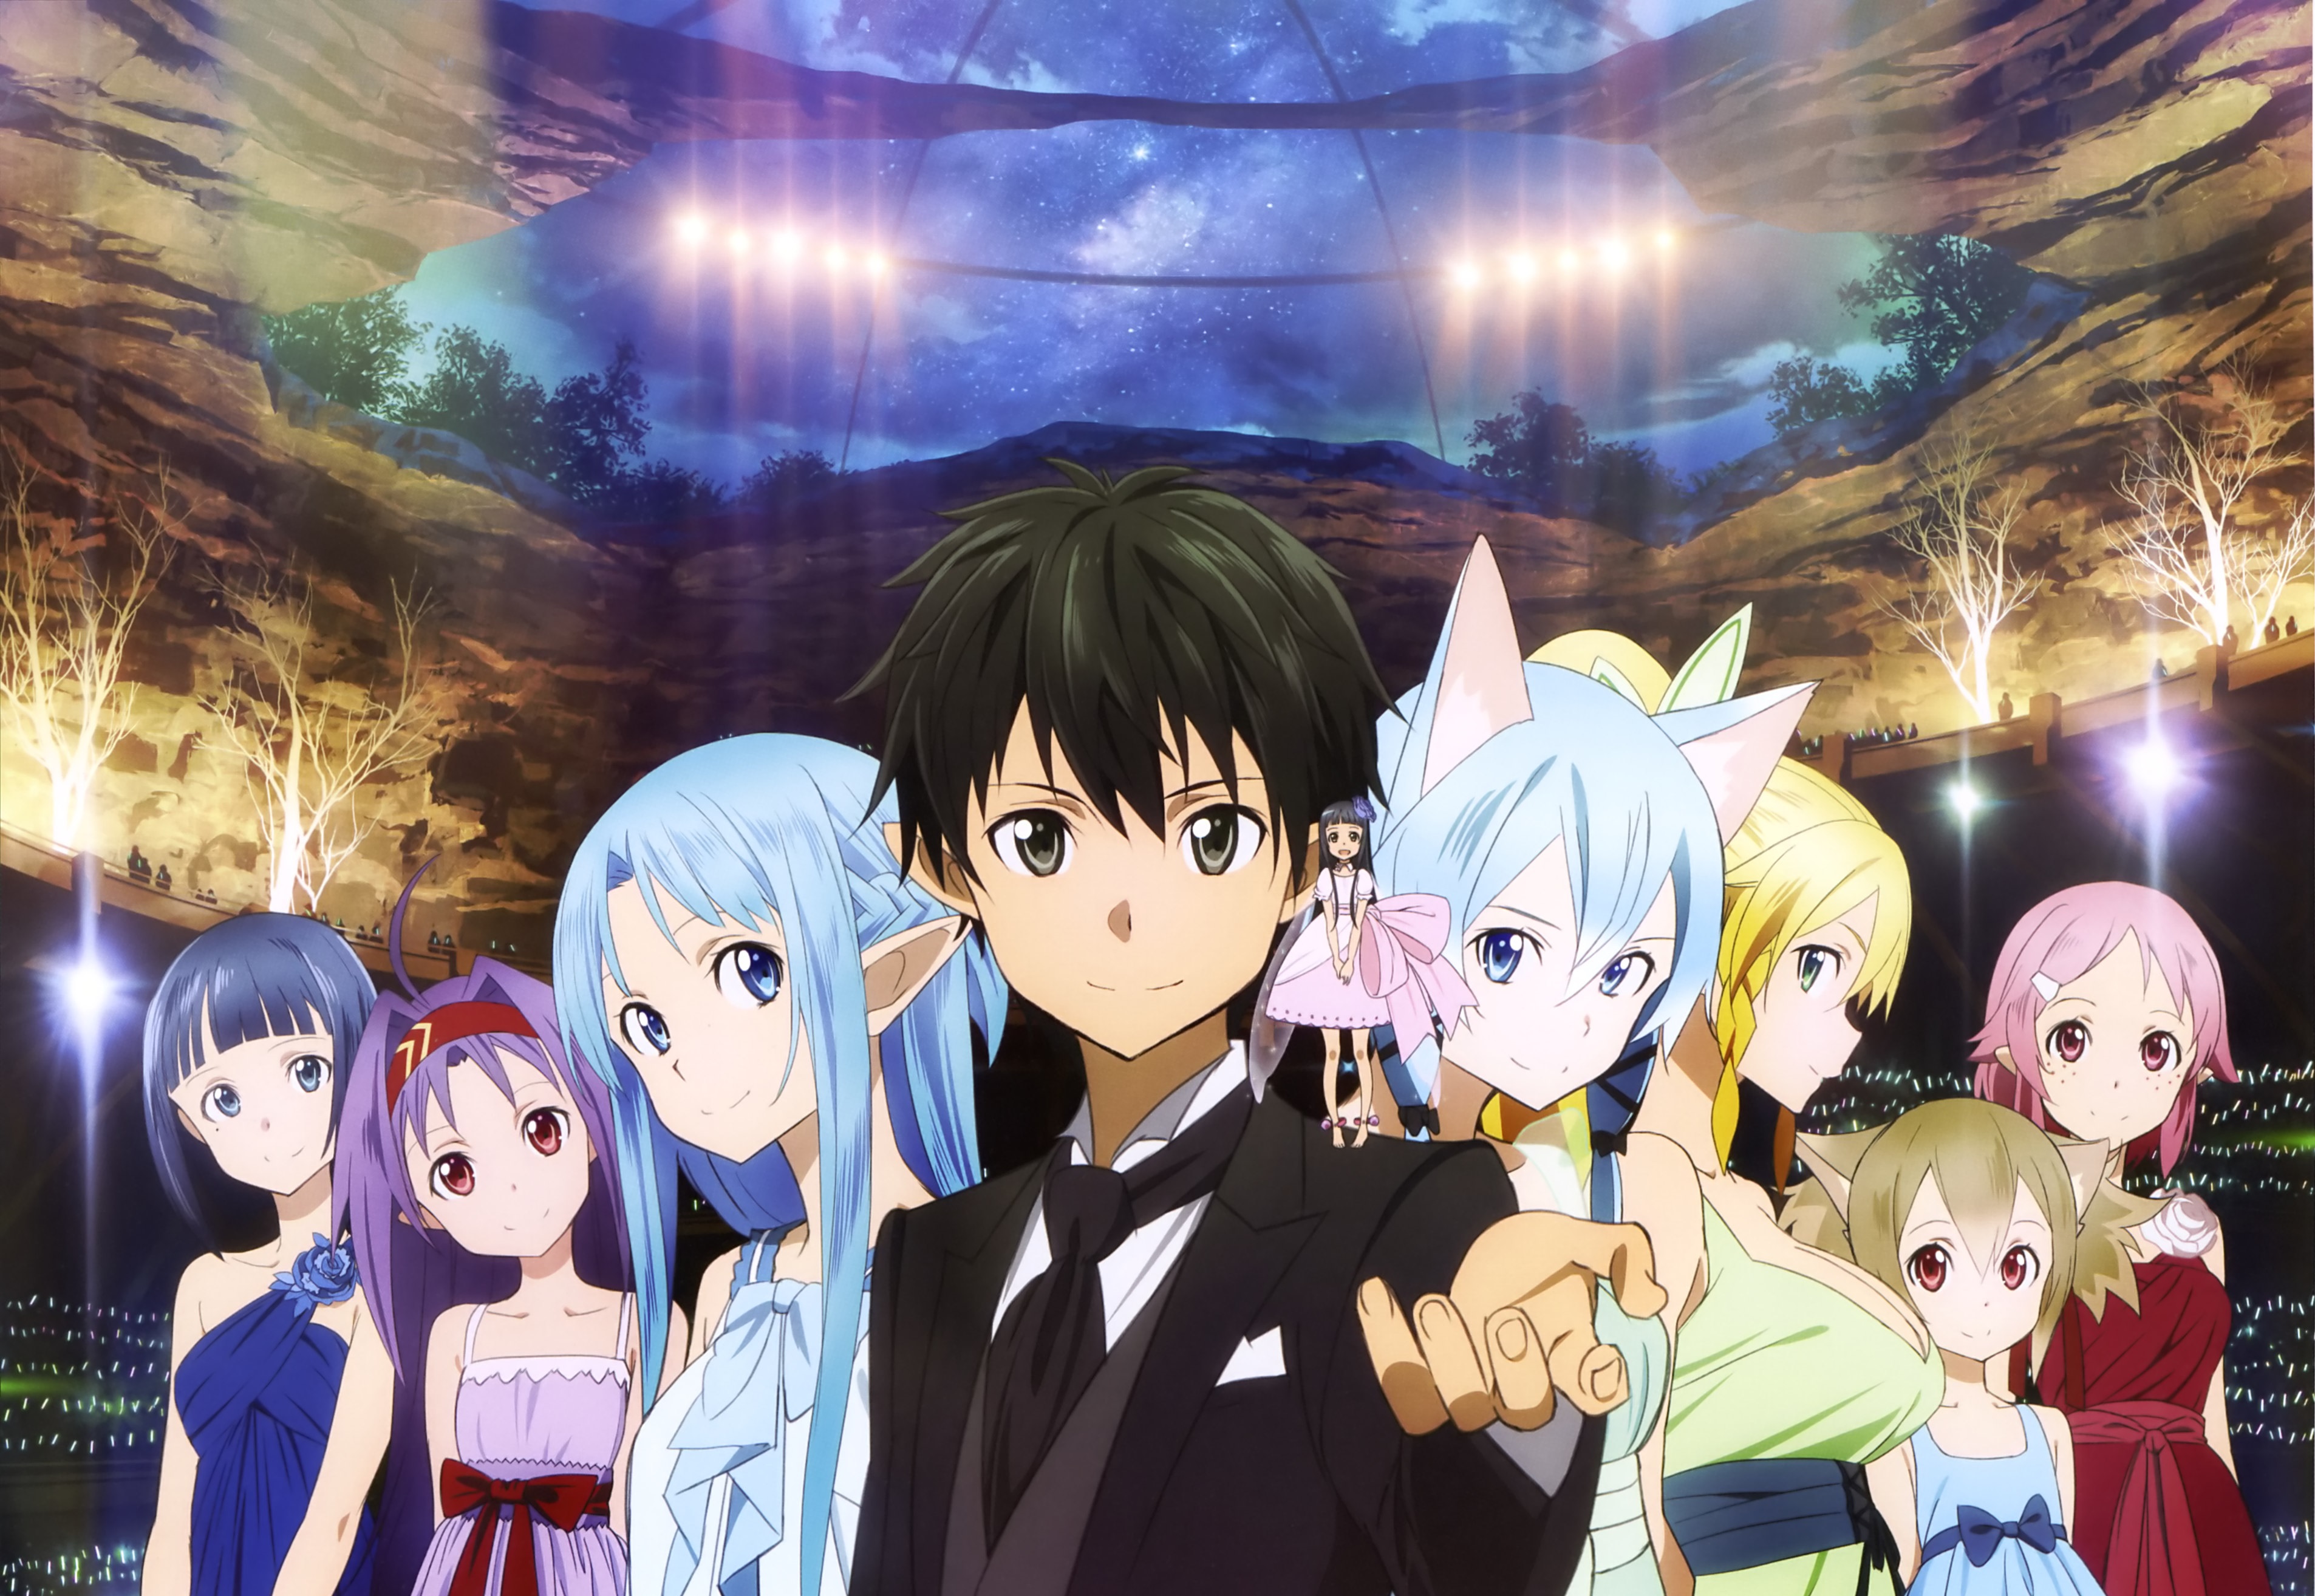 the fun in everything: Anime: Sword Art Online